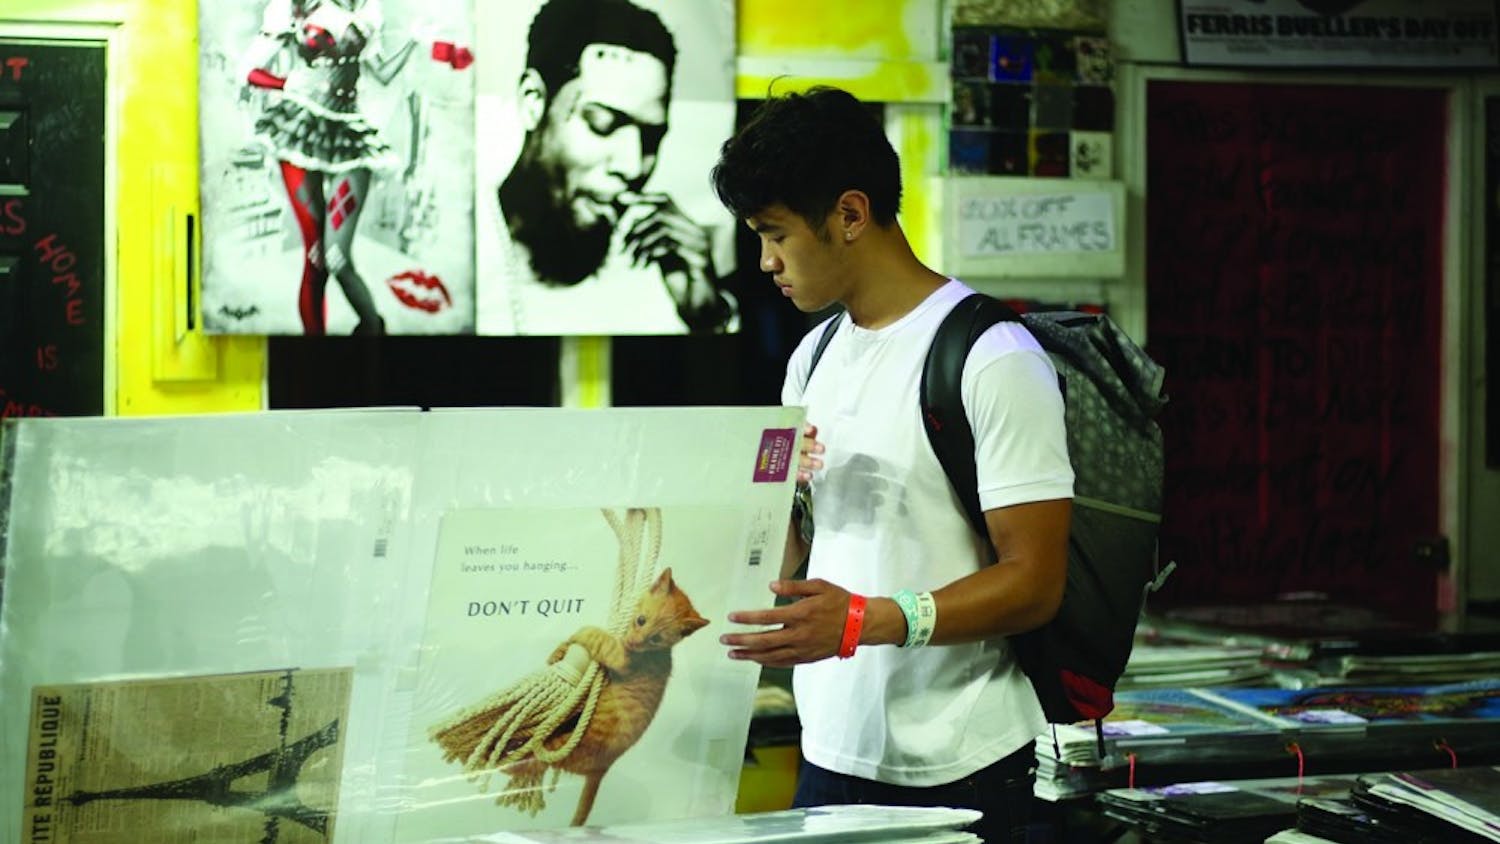 CJ Alfonso, a junior majoring in global studies and public policy, browses the poster sale at the Teen Center on Rosemary St. This poster sale has opened the UNC school year for over twenty years.